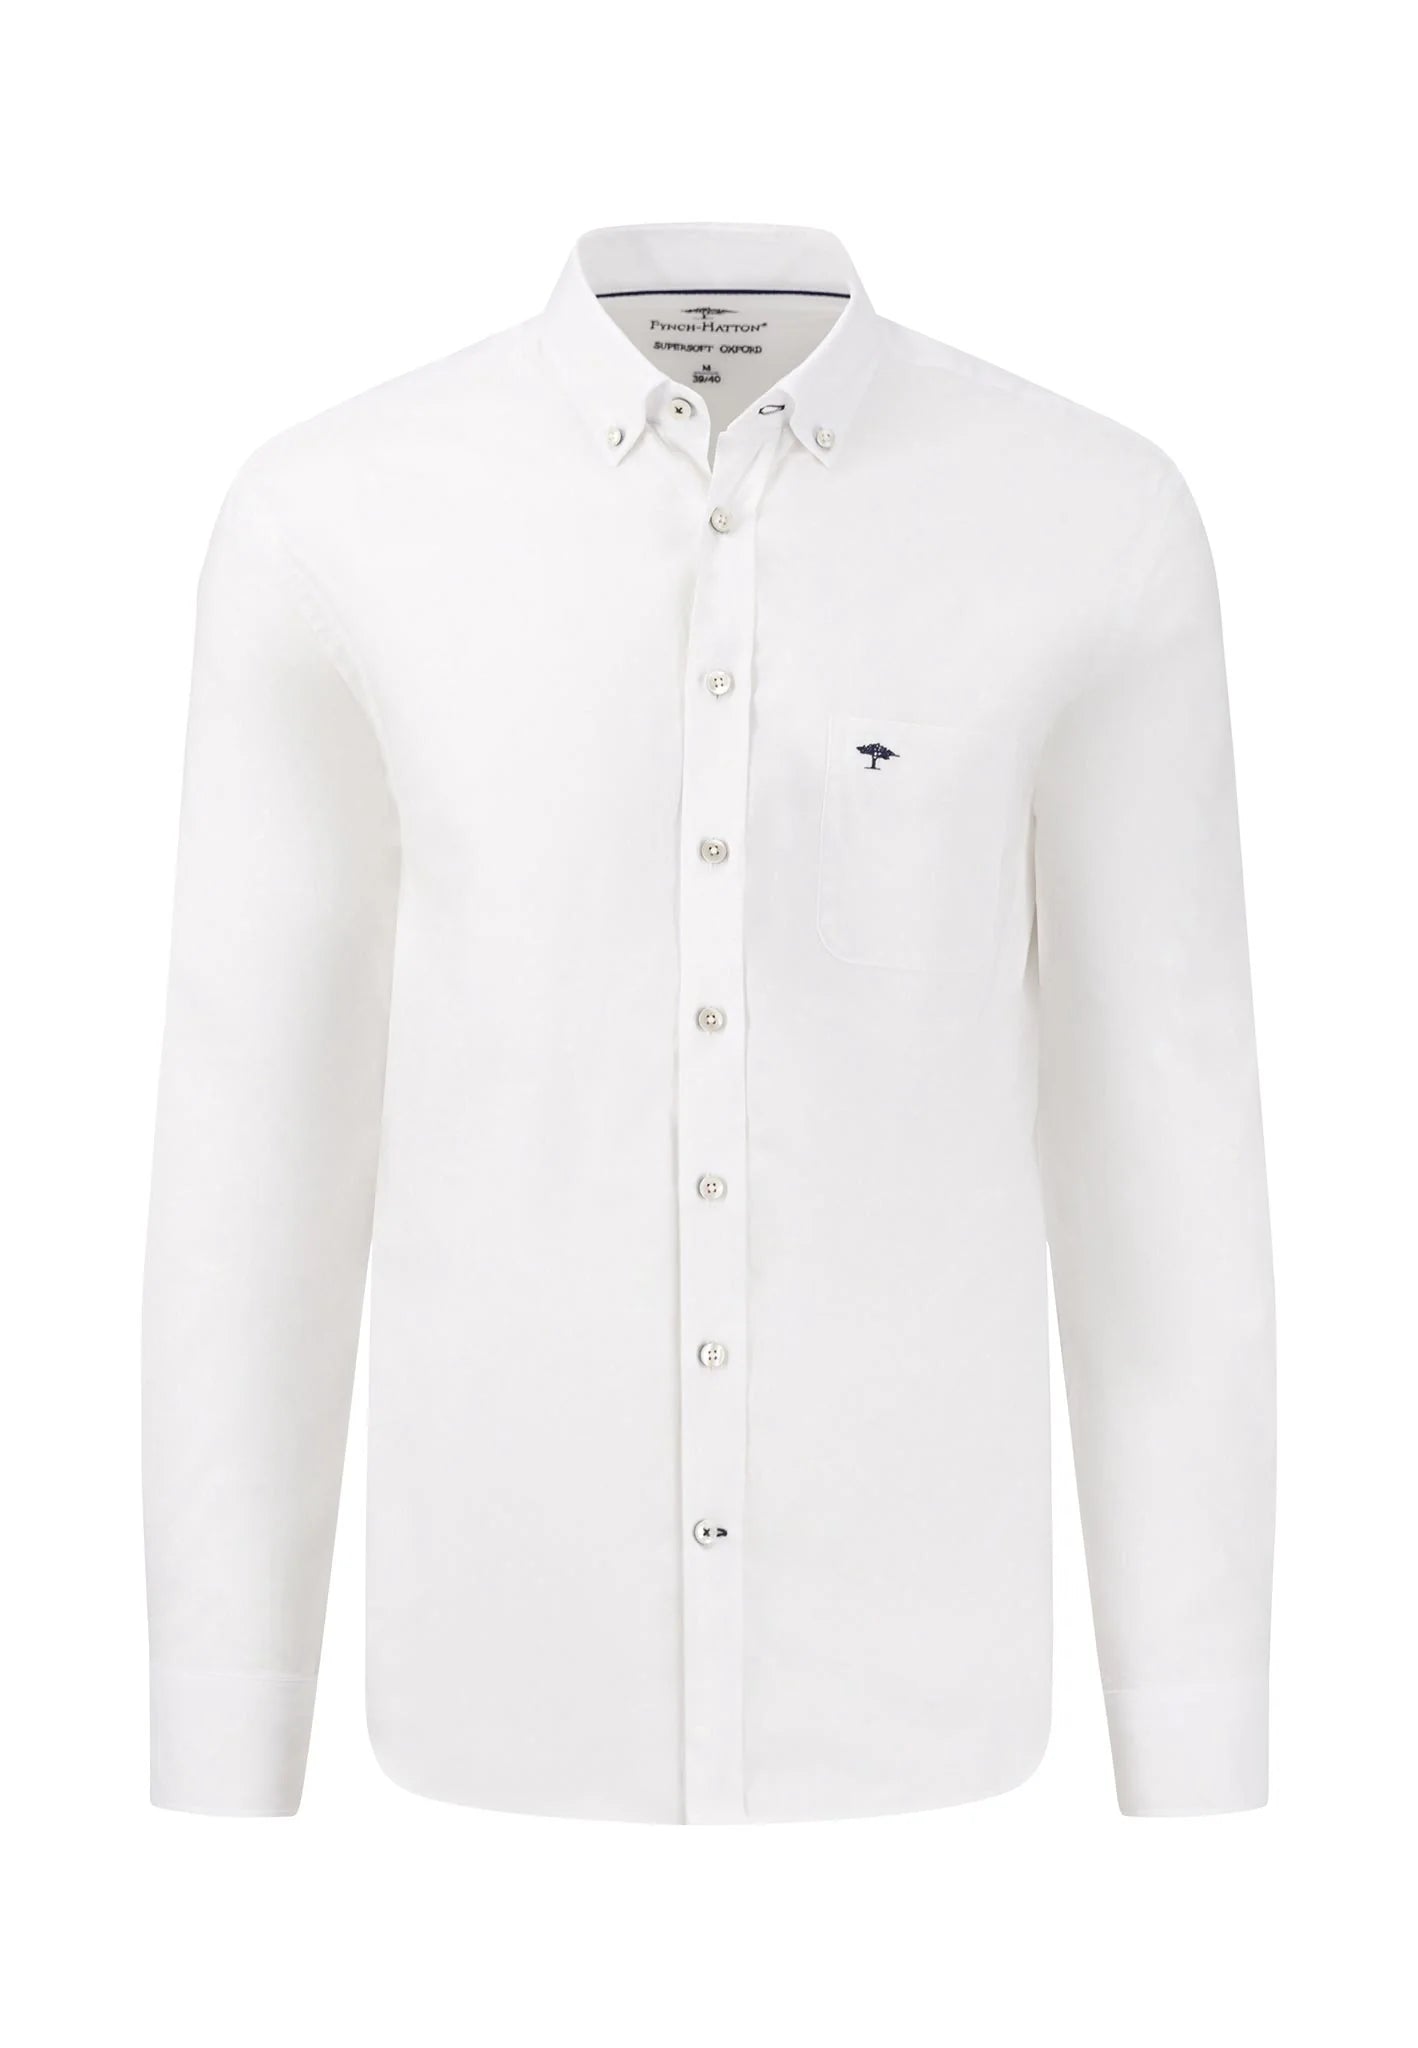 FYNCH-HATTON Oxford Made Of Soft Cotton, White